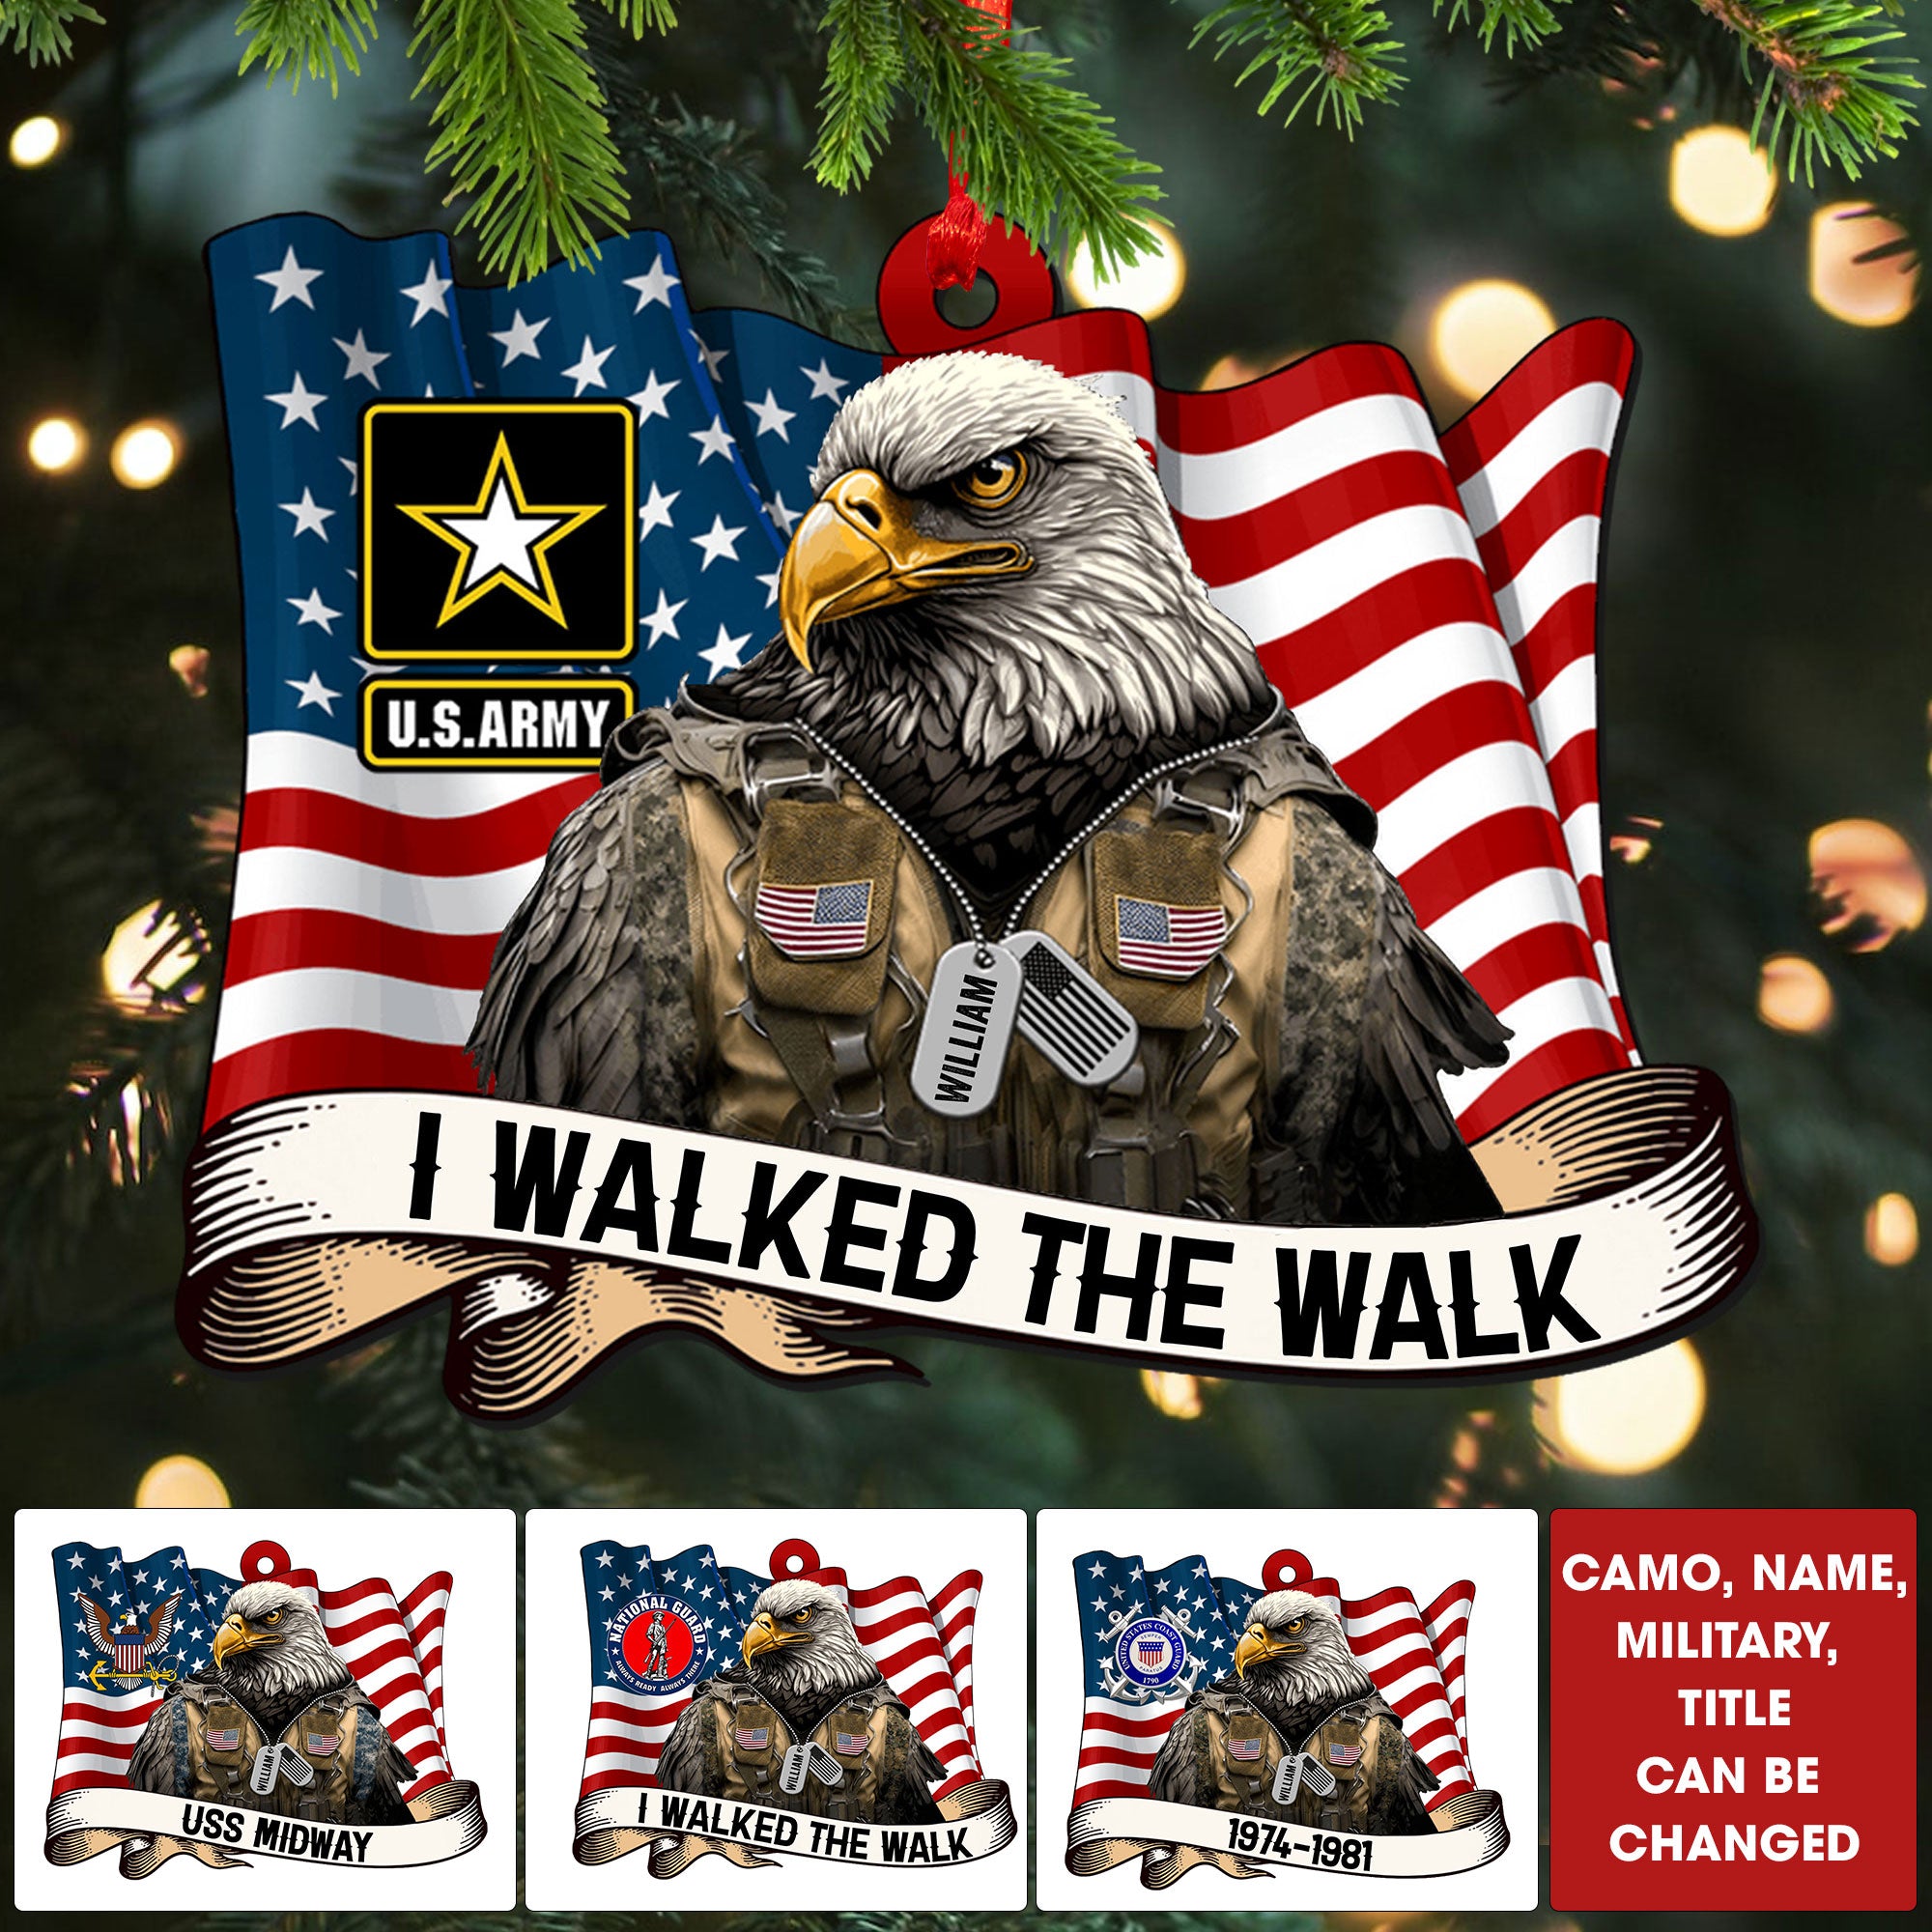 U.S Army, I Walked The Walk - Personalized Acrylic Ornament - Veterans Gift